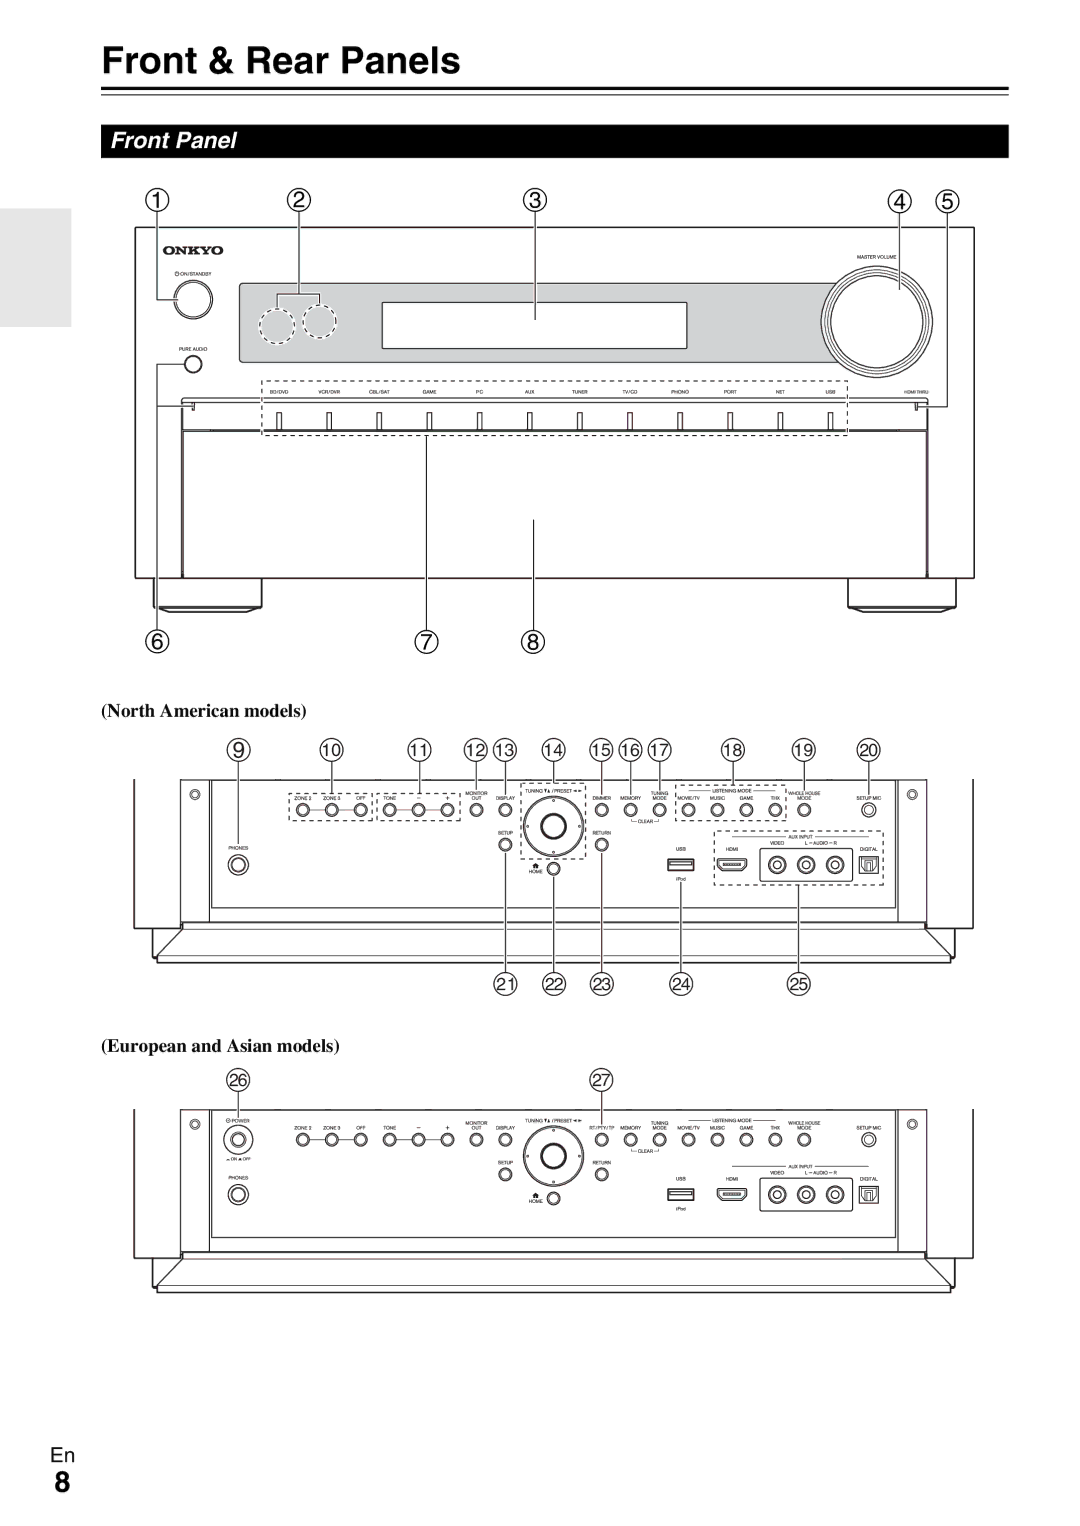 Onkyo TX-NR5009 instruction manual Front & Rear Panels, Front Panel, North American models, European and Asian models 